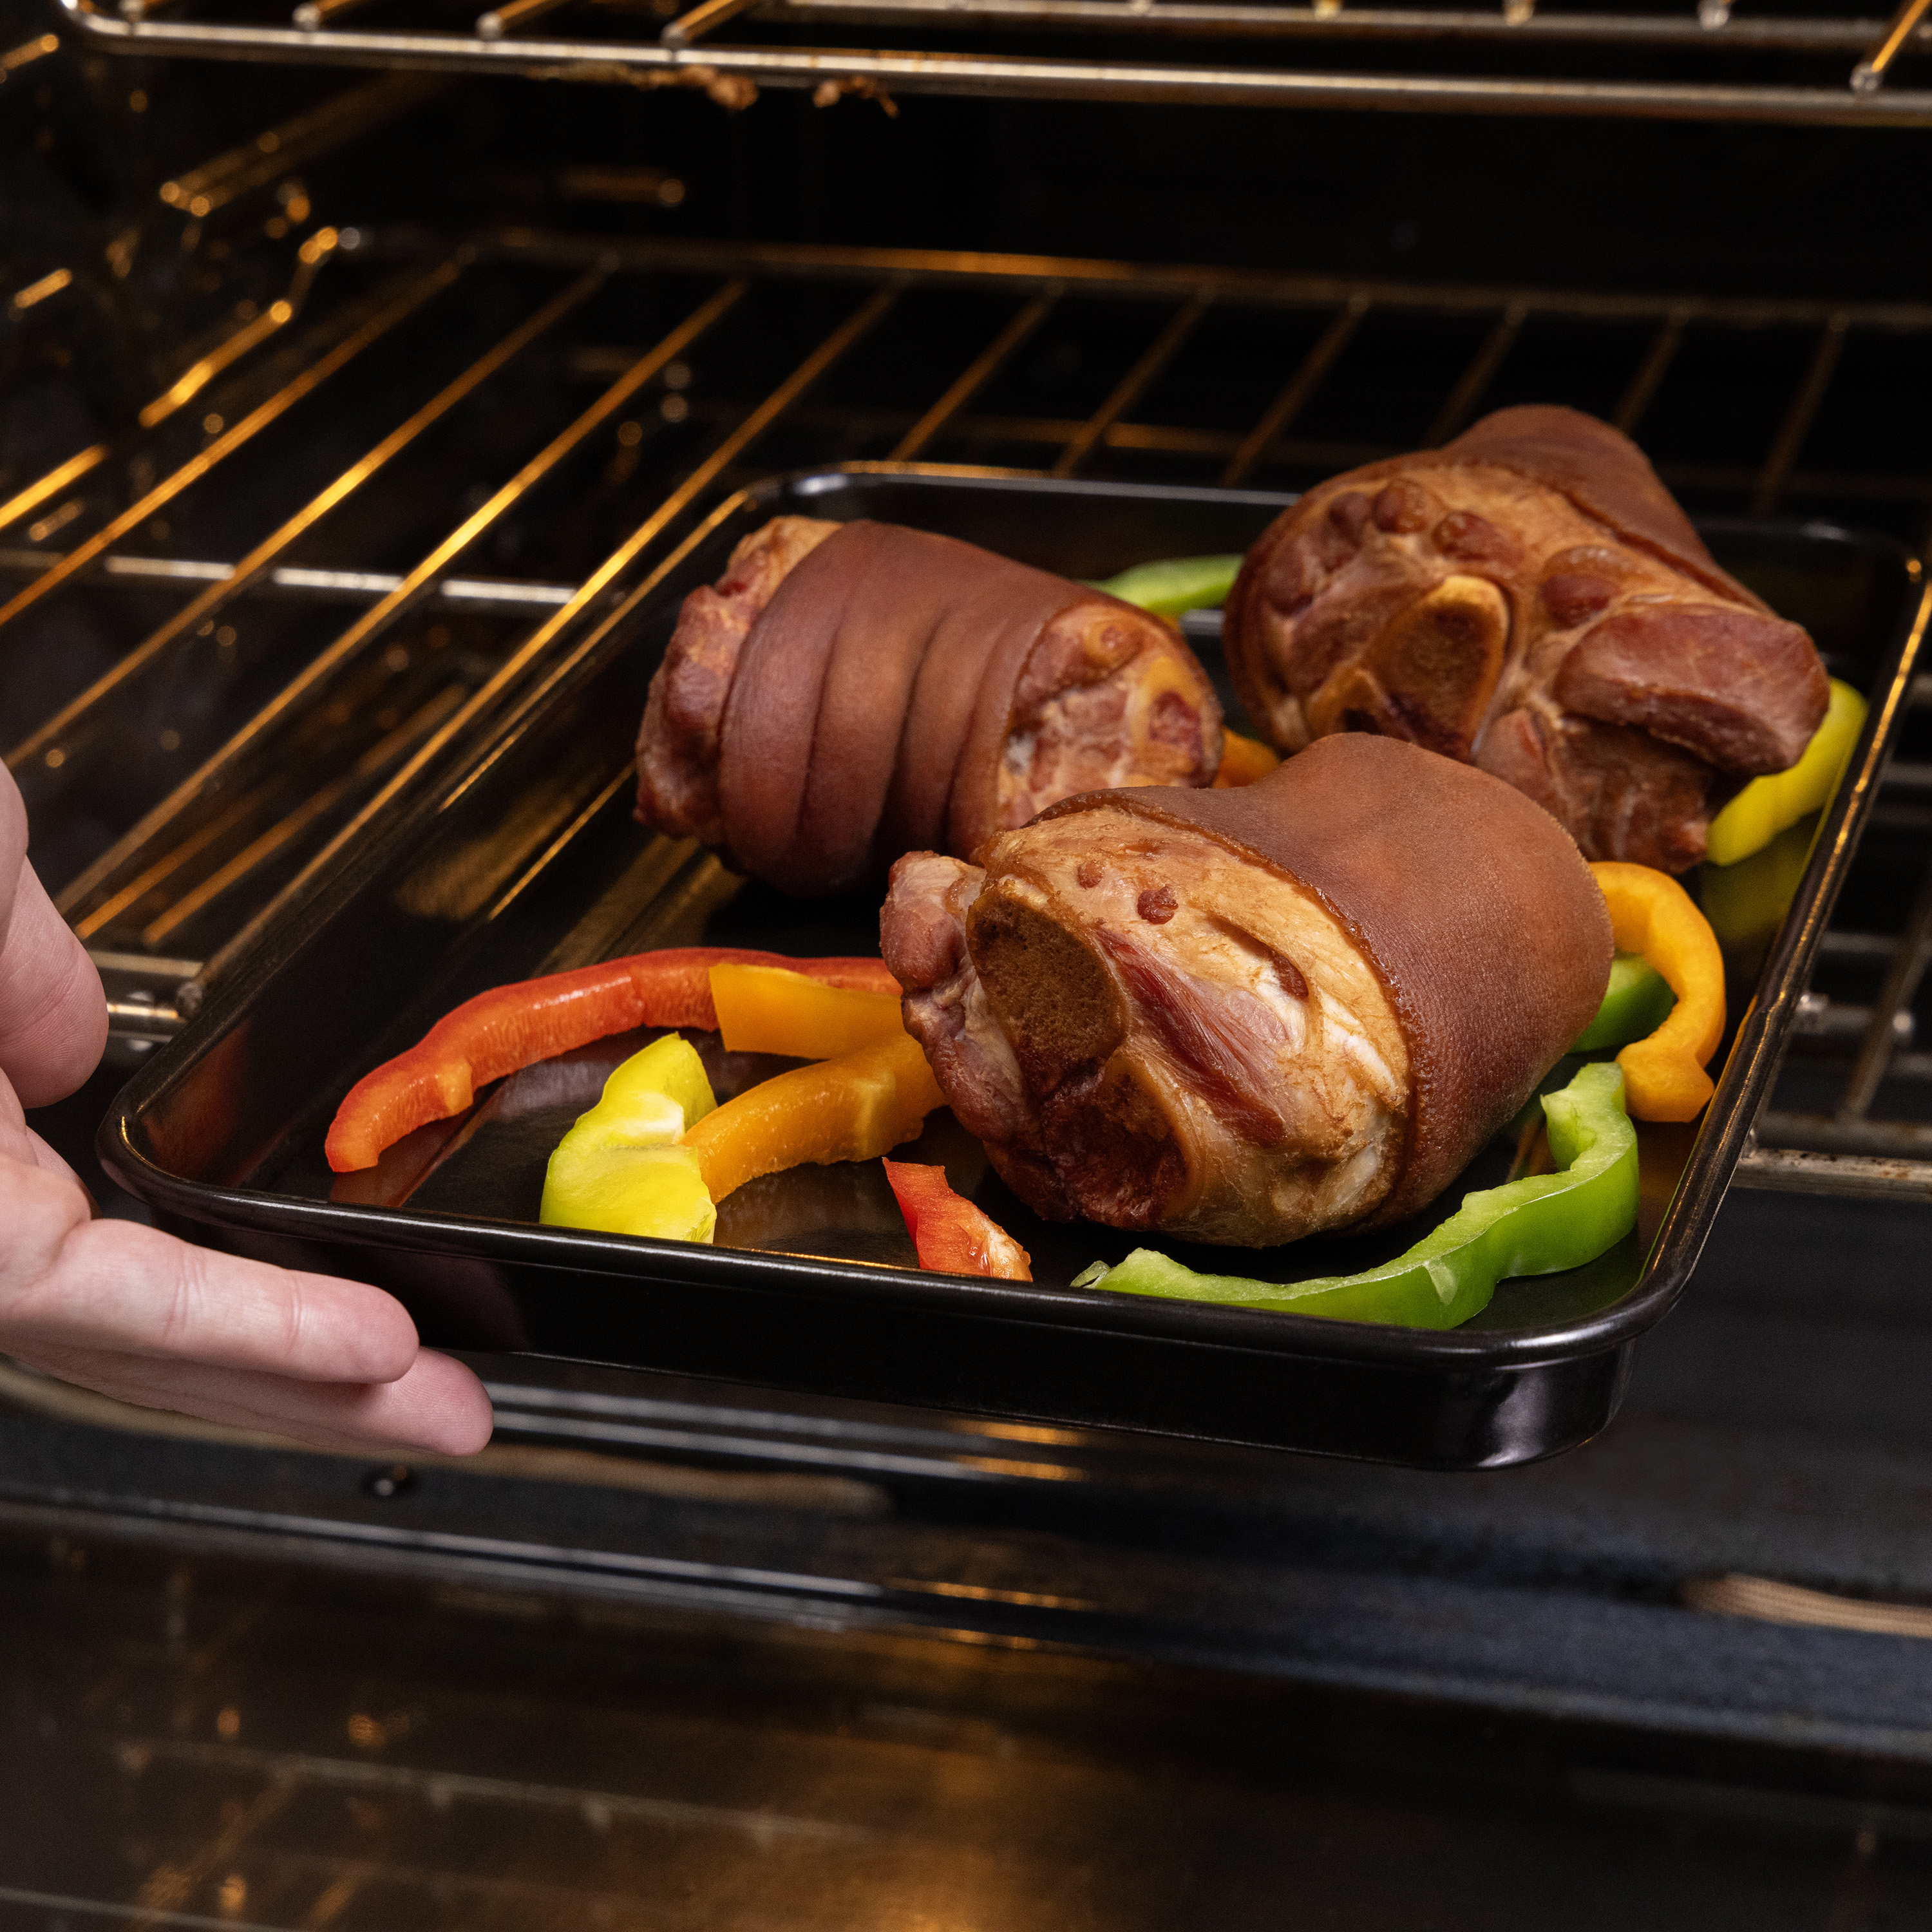 A & R Packing Co Inc. Tray, Smoked, Smoked Pork Hocks, 1.7-2.75lbs Serving Size 3oz, Protein Per Serving 14g - image 3 of 9